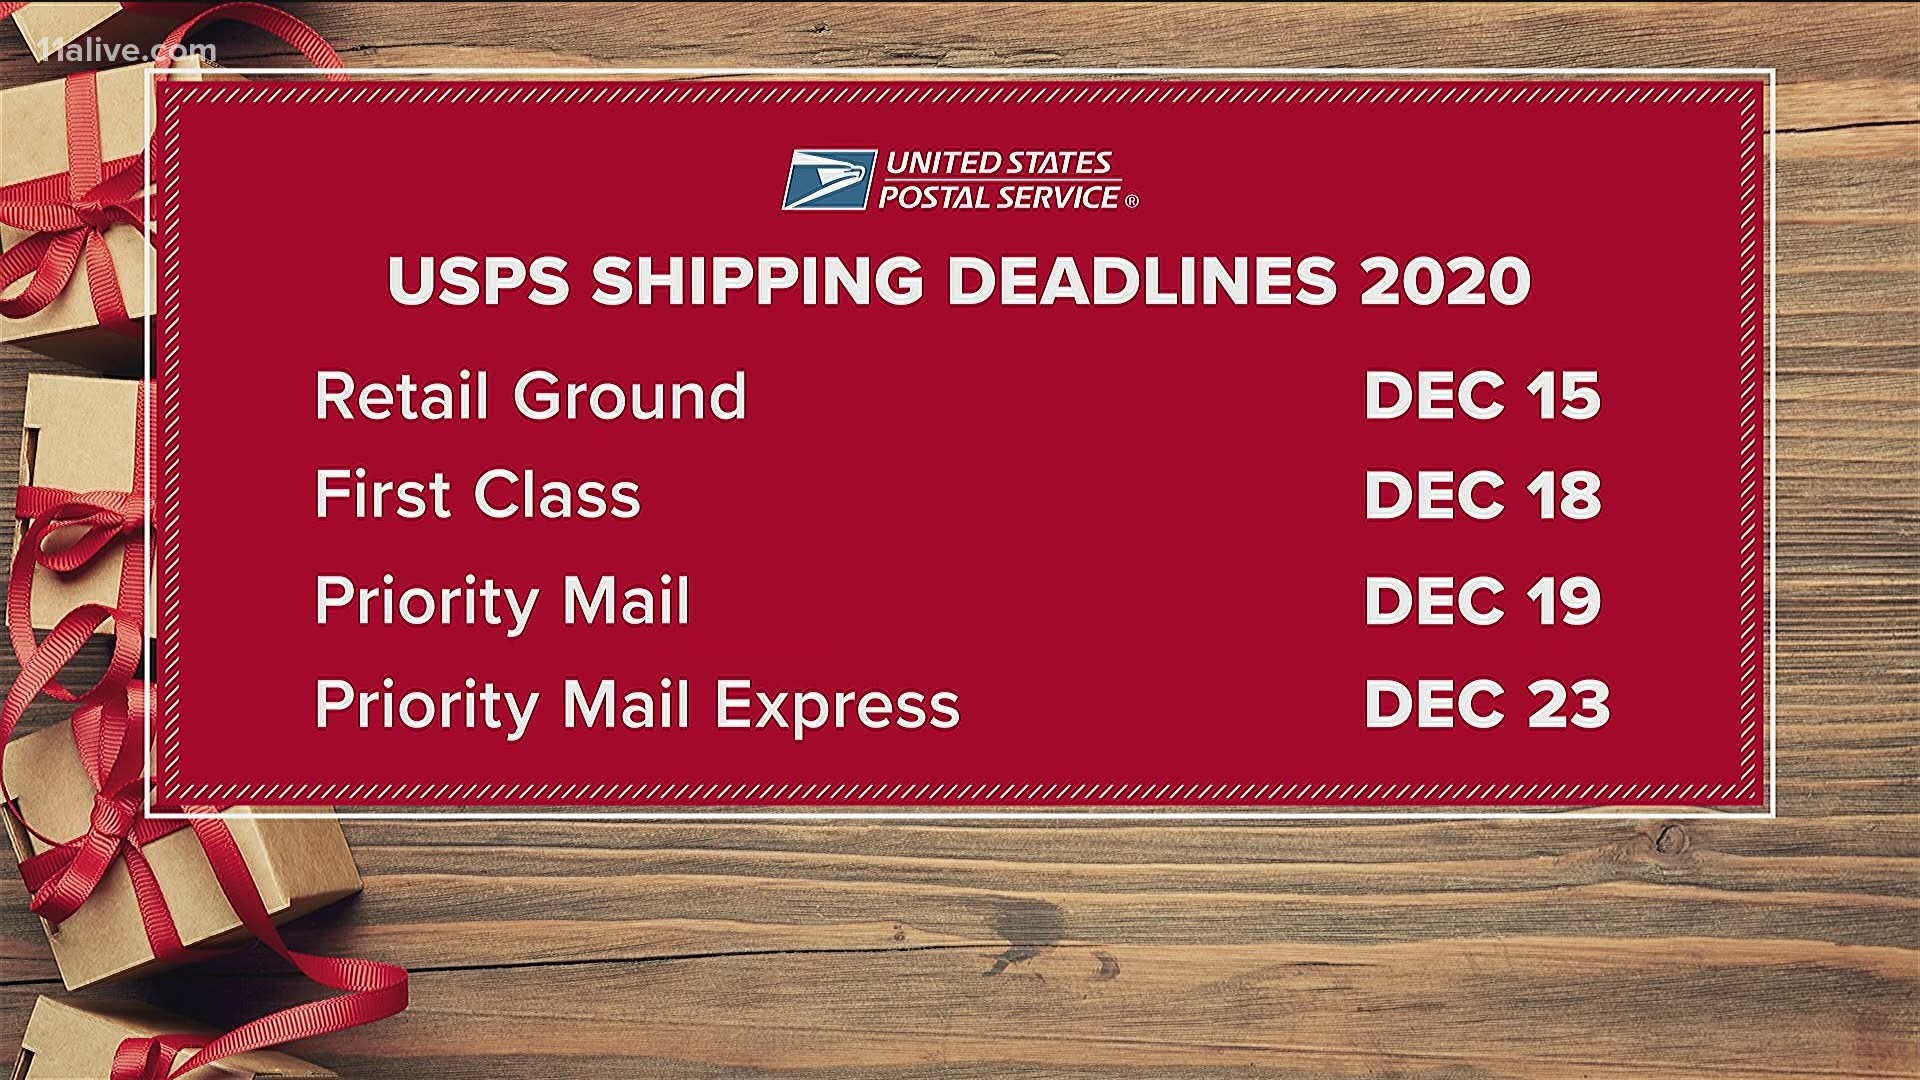 Don't wait! Get those gifts in the mail on time.